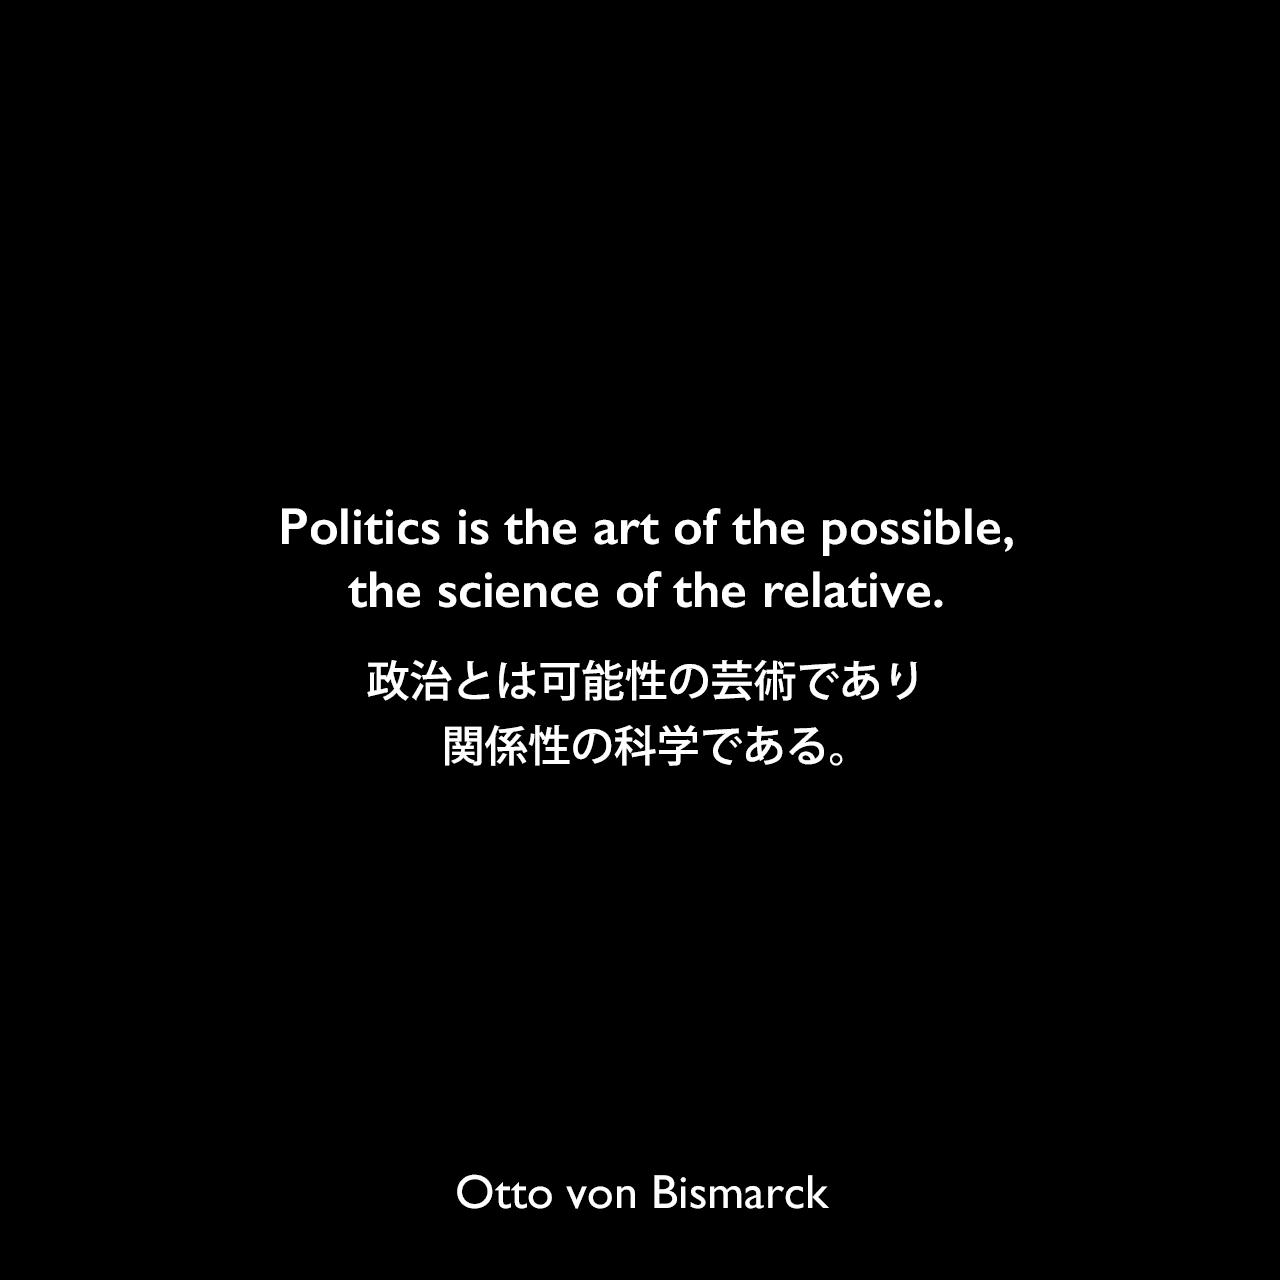 Politics is the art of the possible,the science of the relative.政治とは可能性の芸術であり、関係性の科学である。Otto von Bismarck